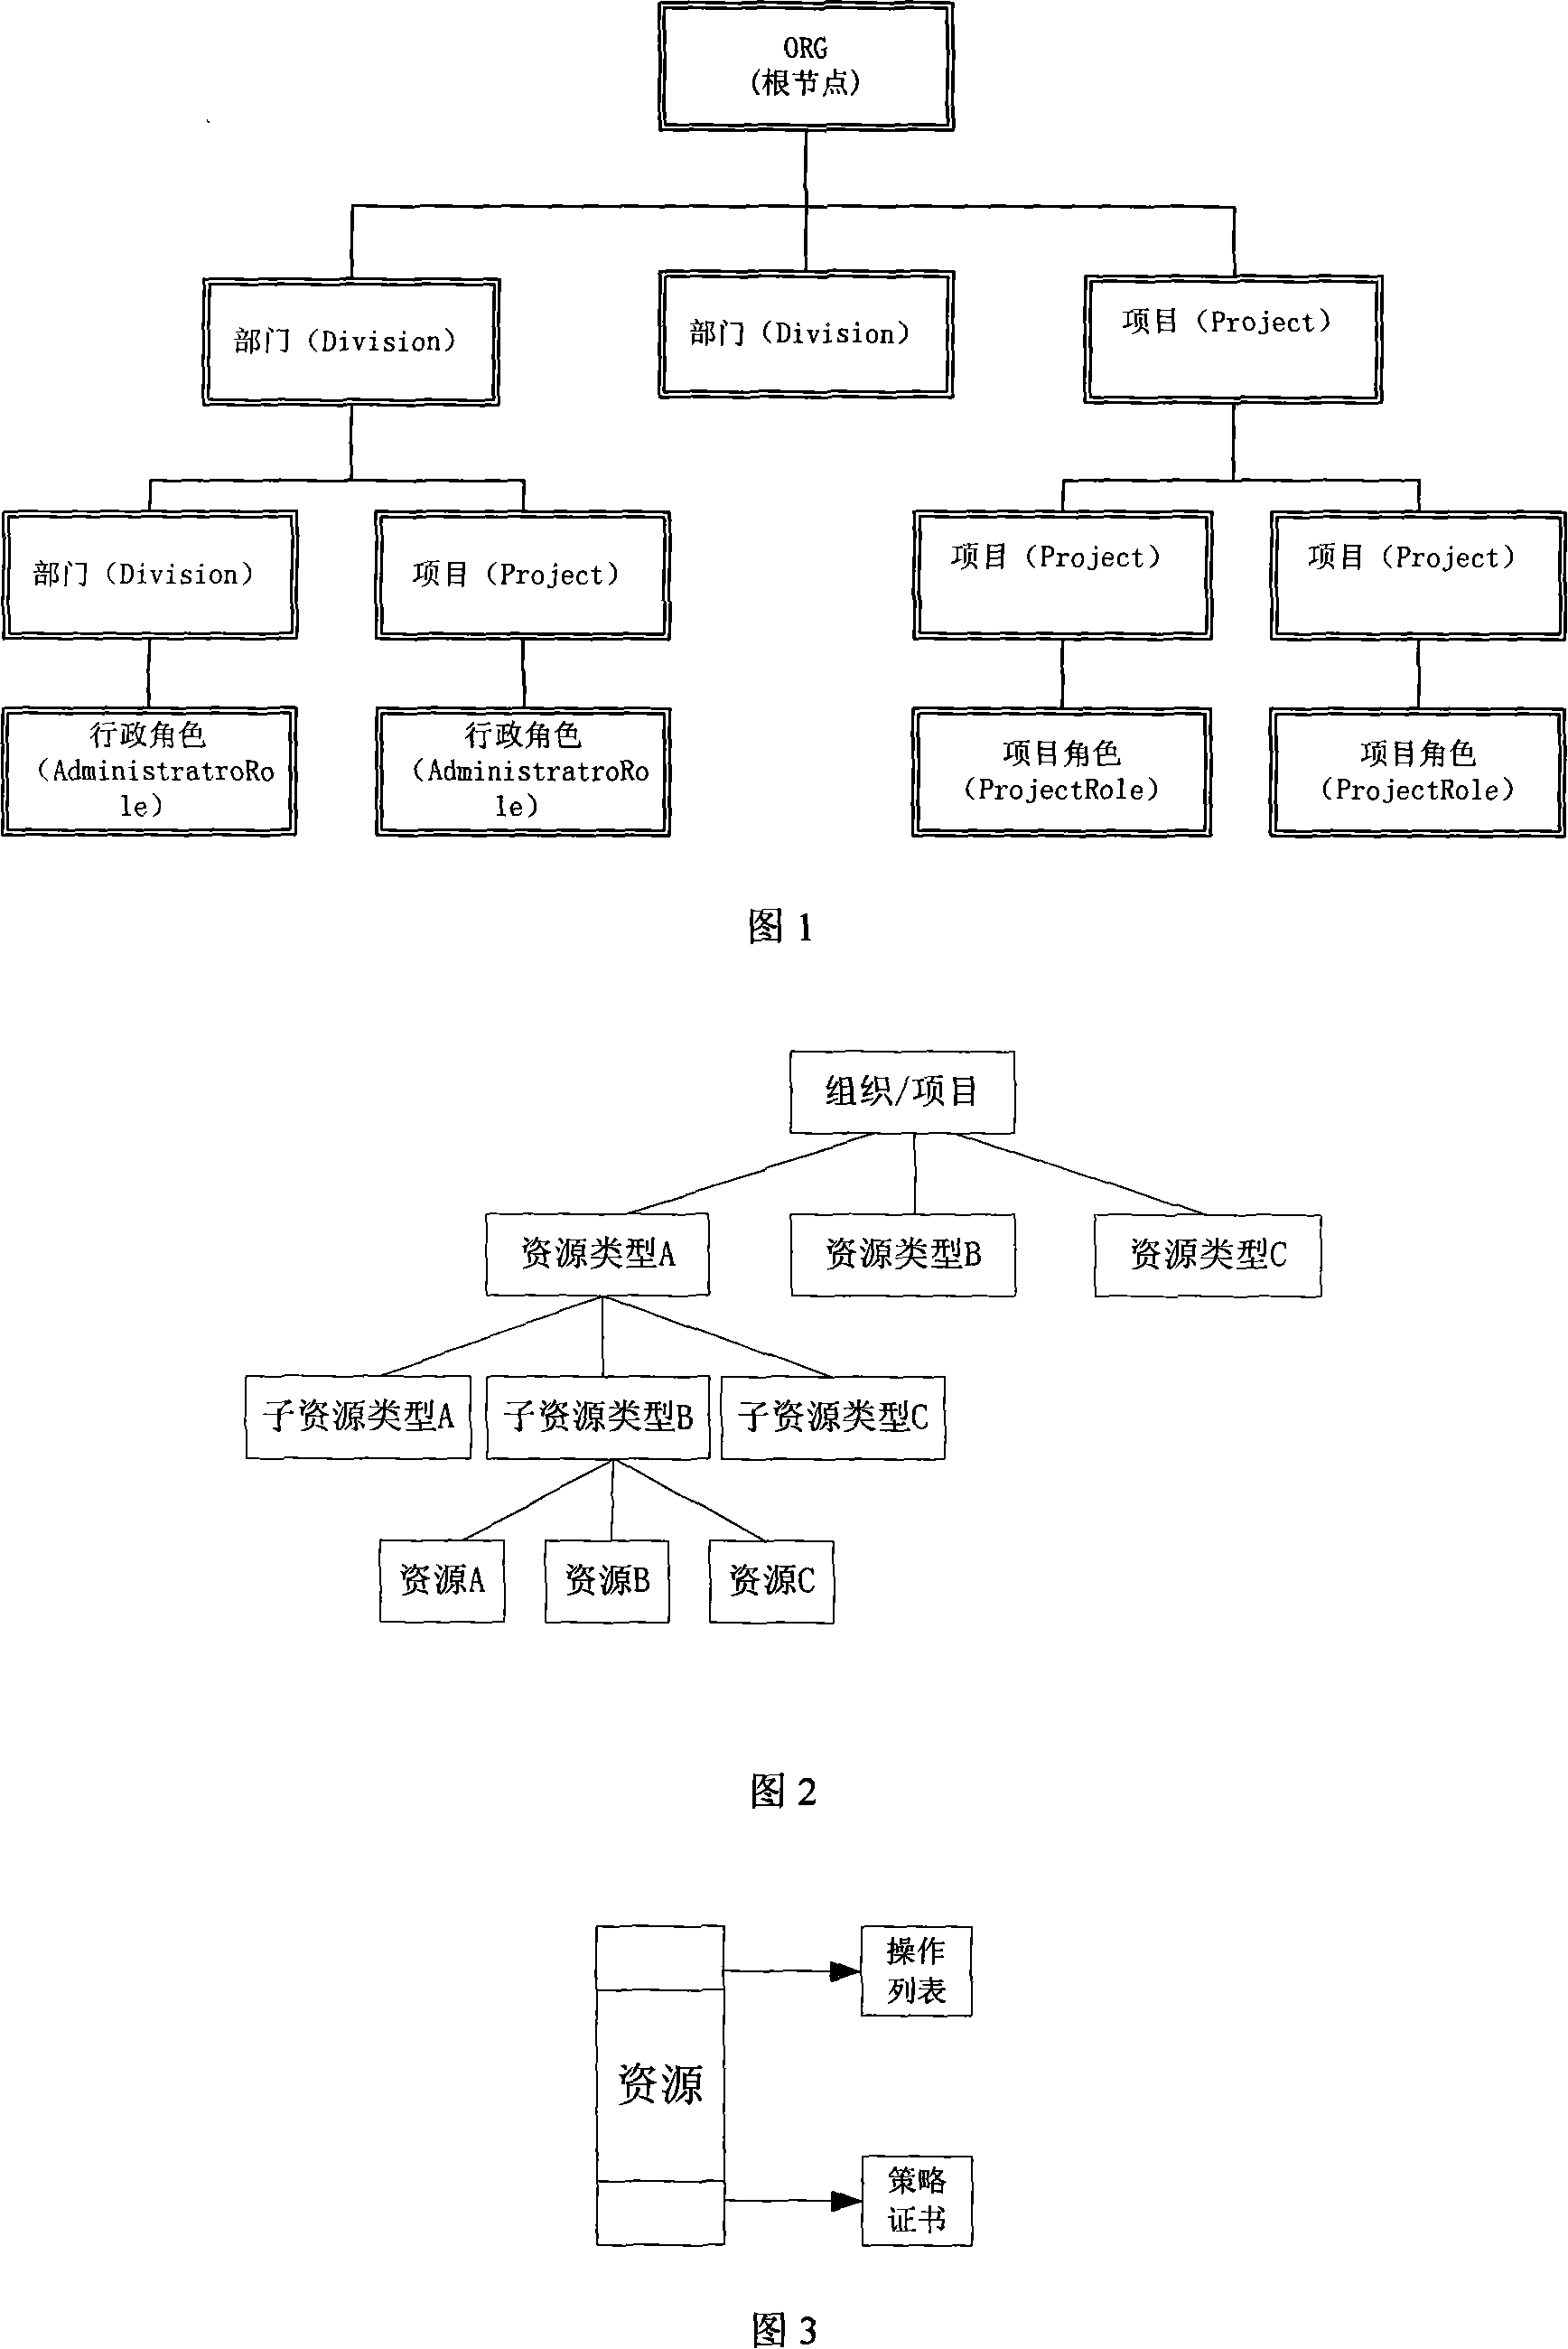 Design and storage method for resource and its access control policy in high-performance access control system